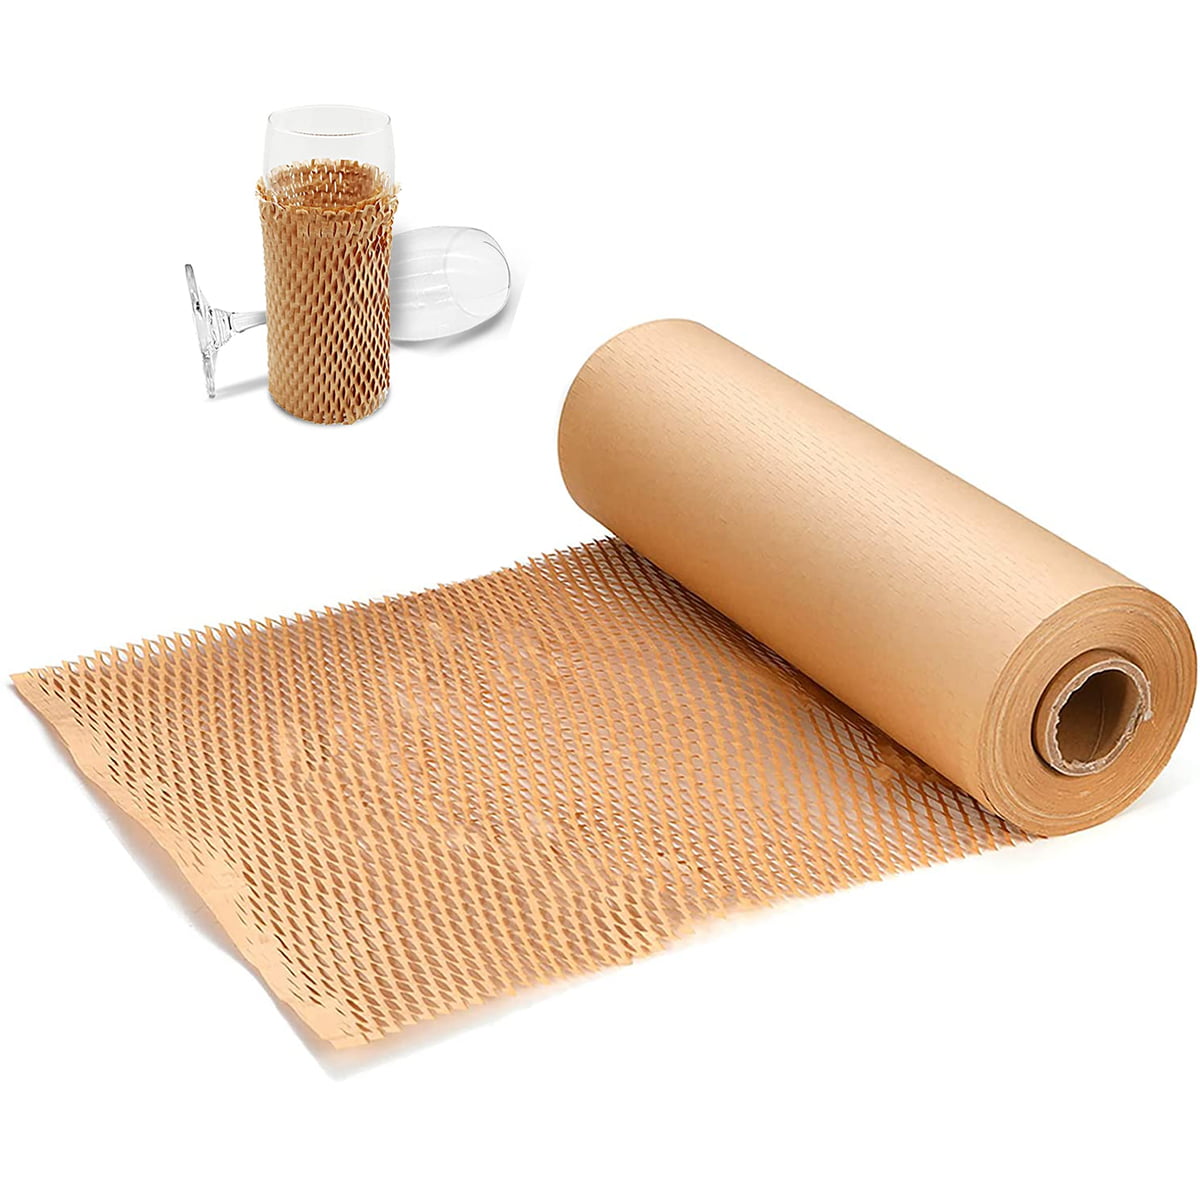 Heavy-duty gift Product Sheets Recycled Paper Wrap Eco Friendly Packaging Cushioning Protective Box Lining Wrap Biodegradable Bubble Wrap